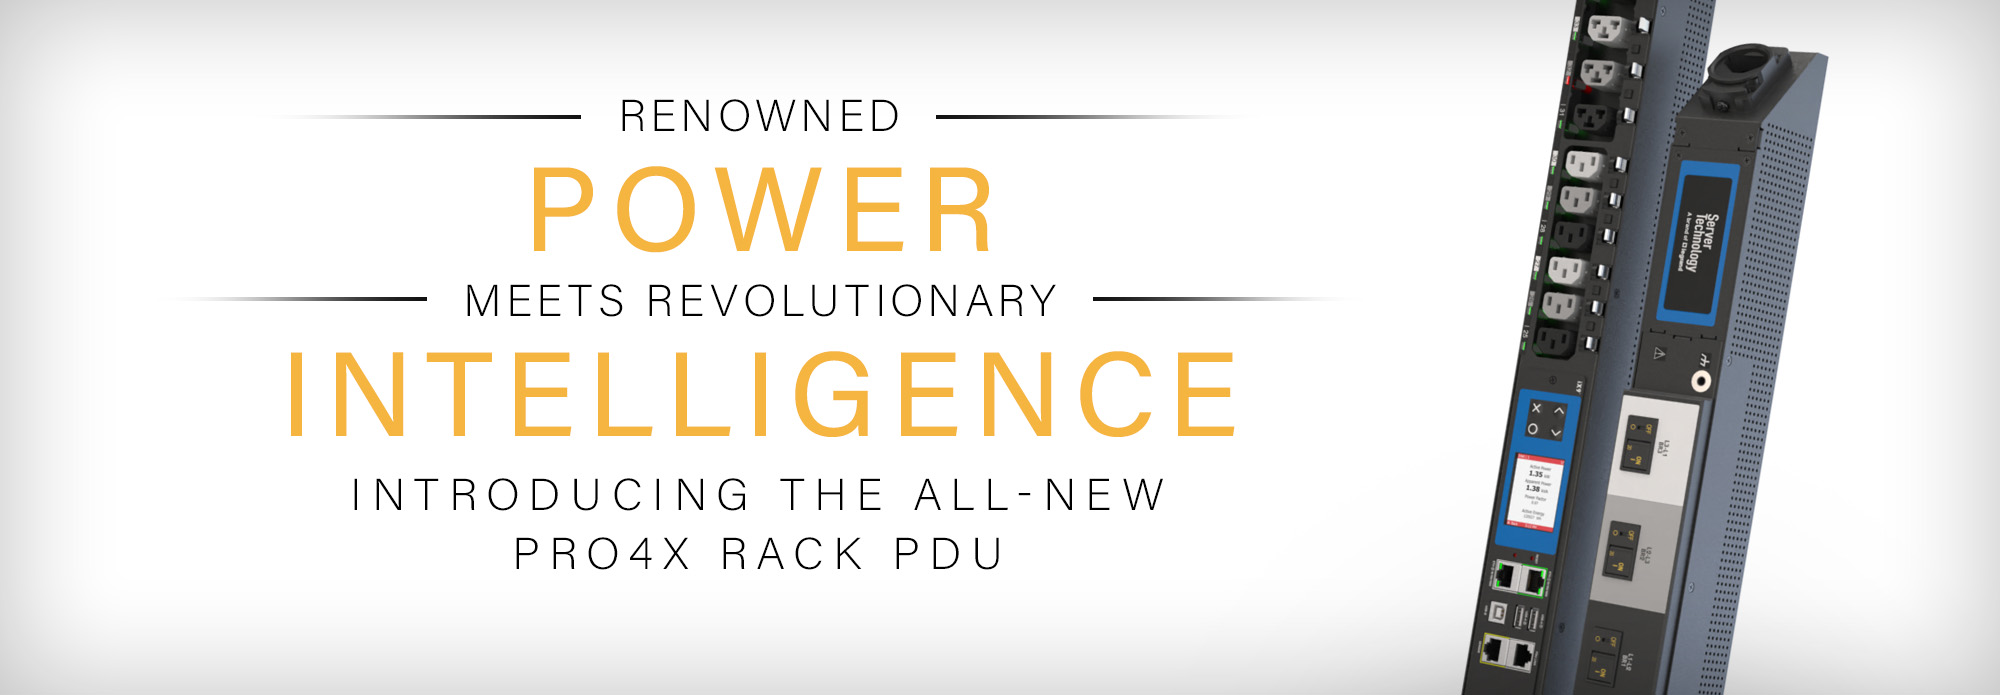 Renowned power meets revolutionary intelligence - Introducing the all-new PRO4X rack pdu